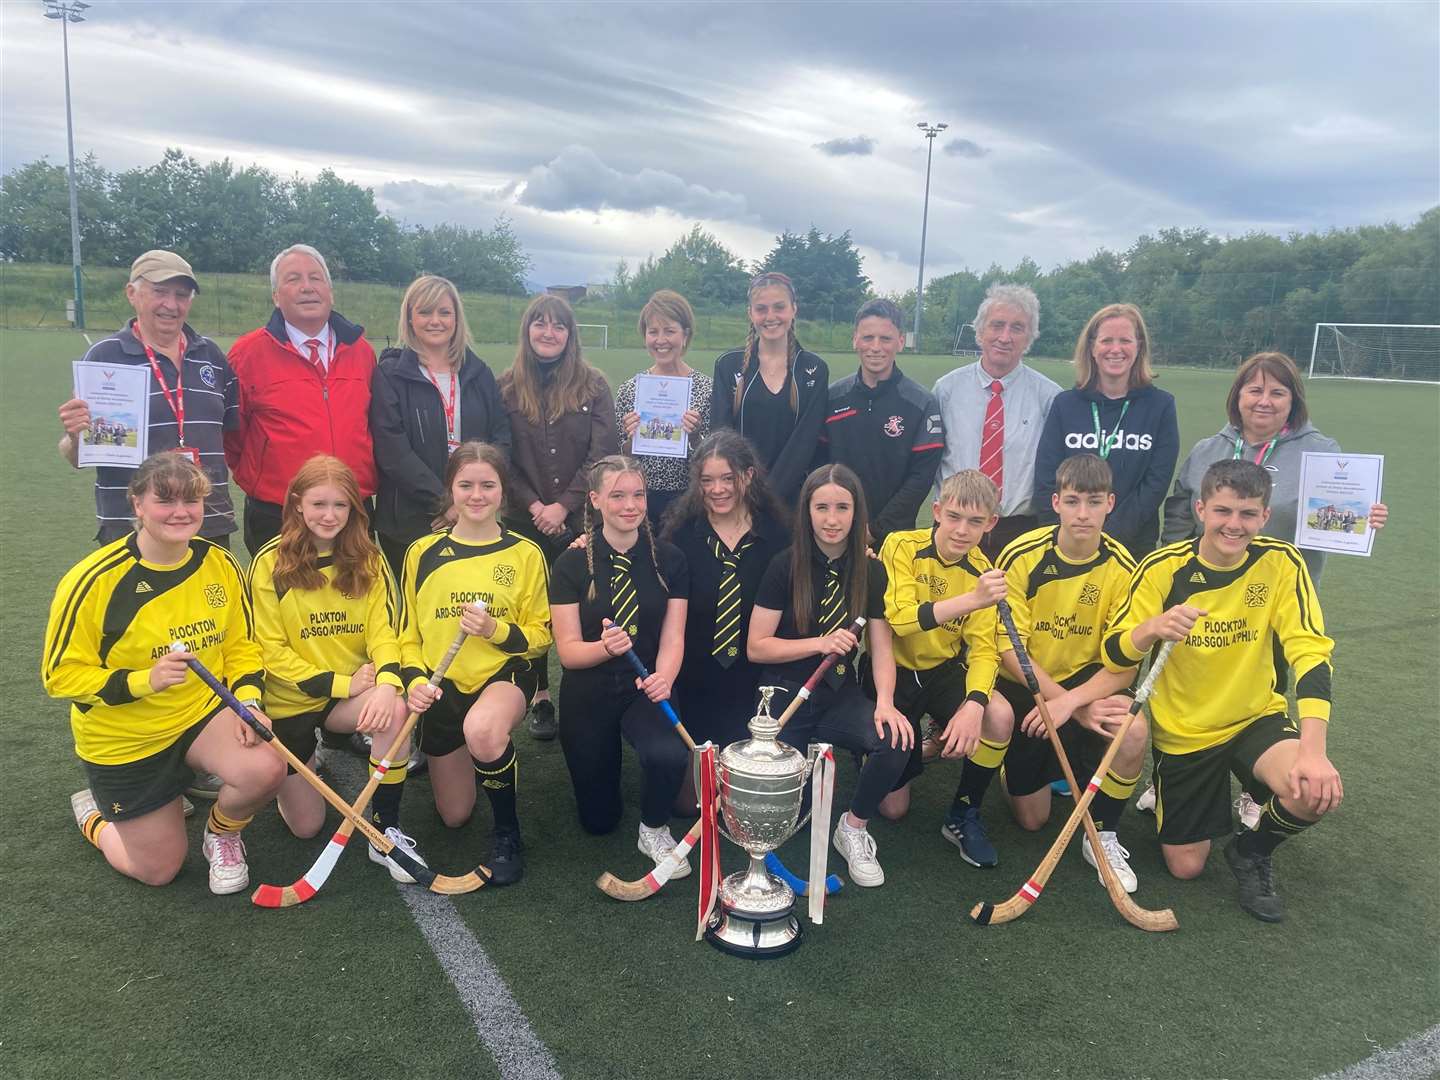 Plockton High School in Wester Ross has become the latest school of shinty, working with Kinlochshiel, Lochcarron and South Skye Juniors.